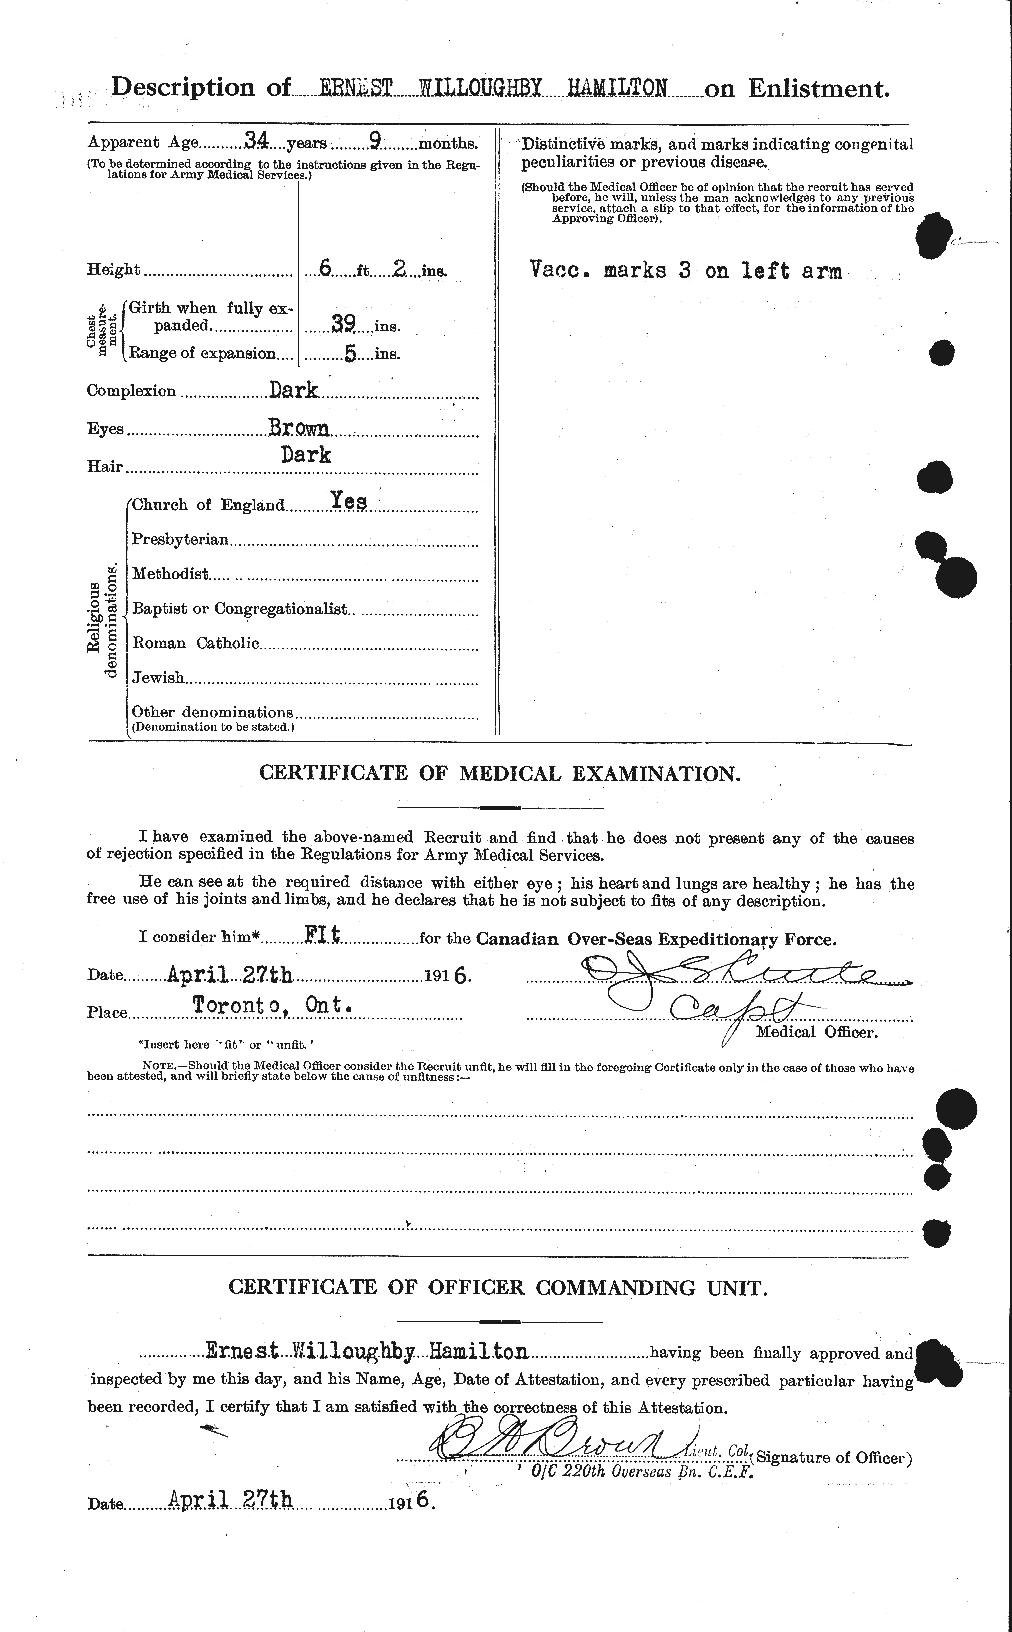 Personnel Records of the First World War - CEF 375391b